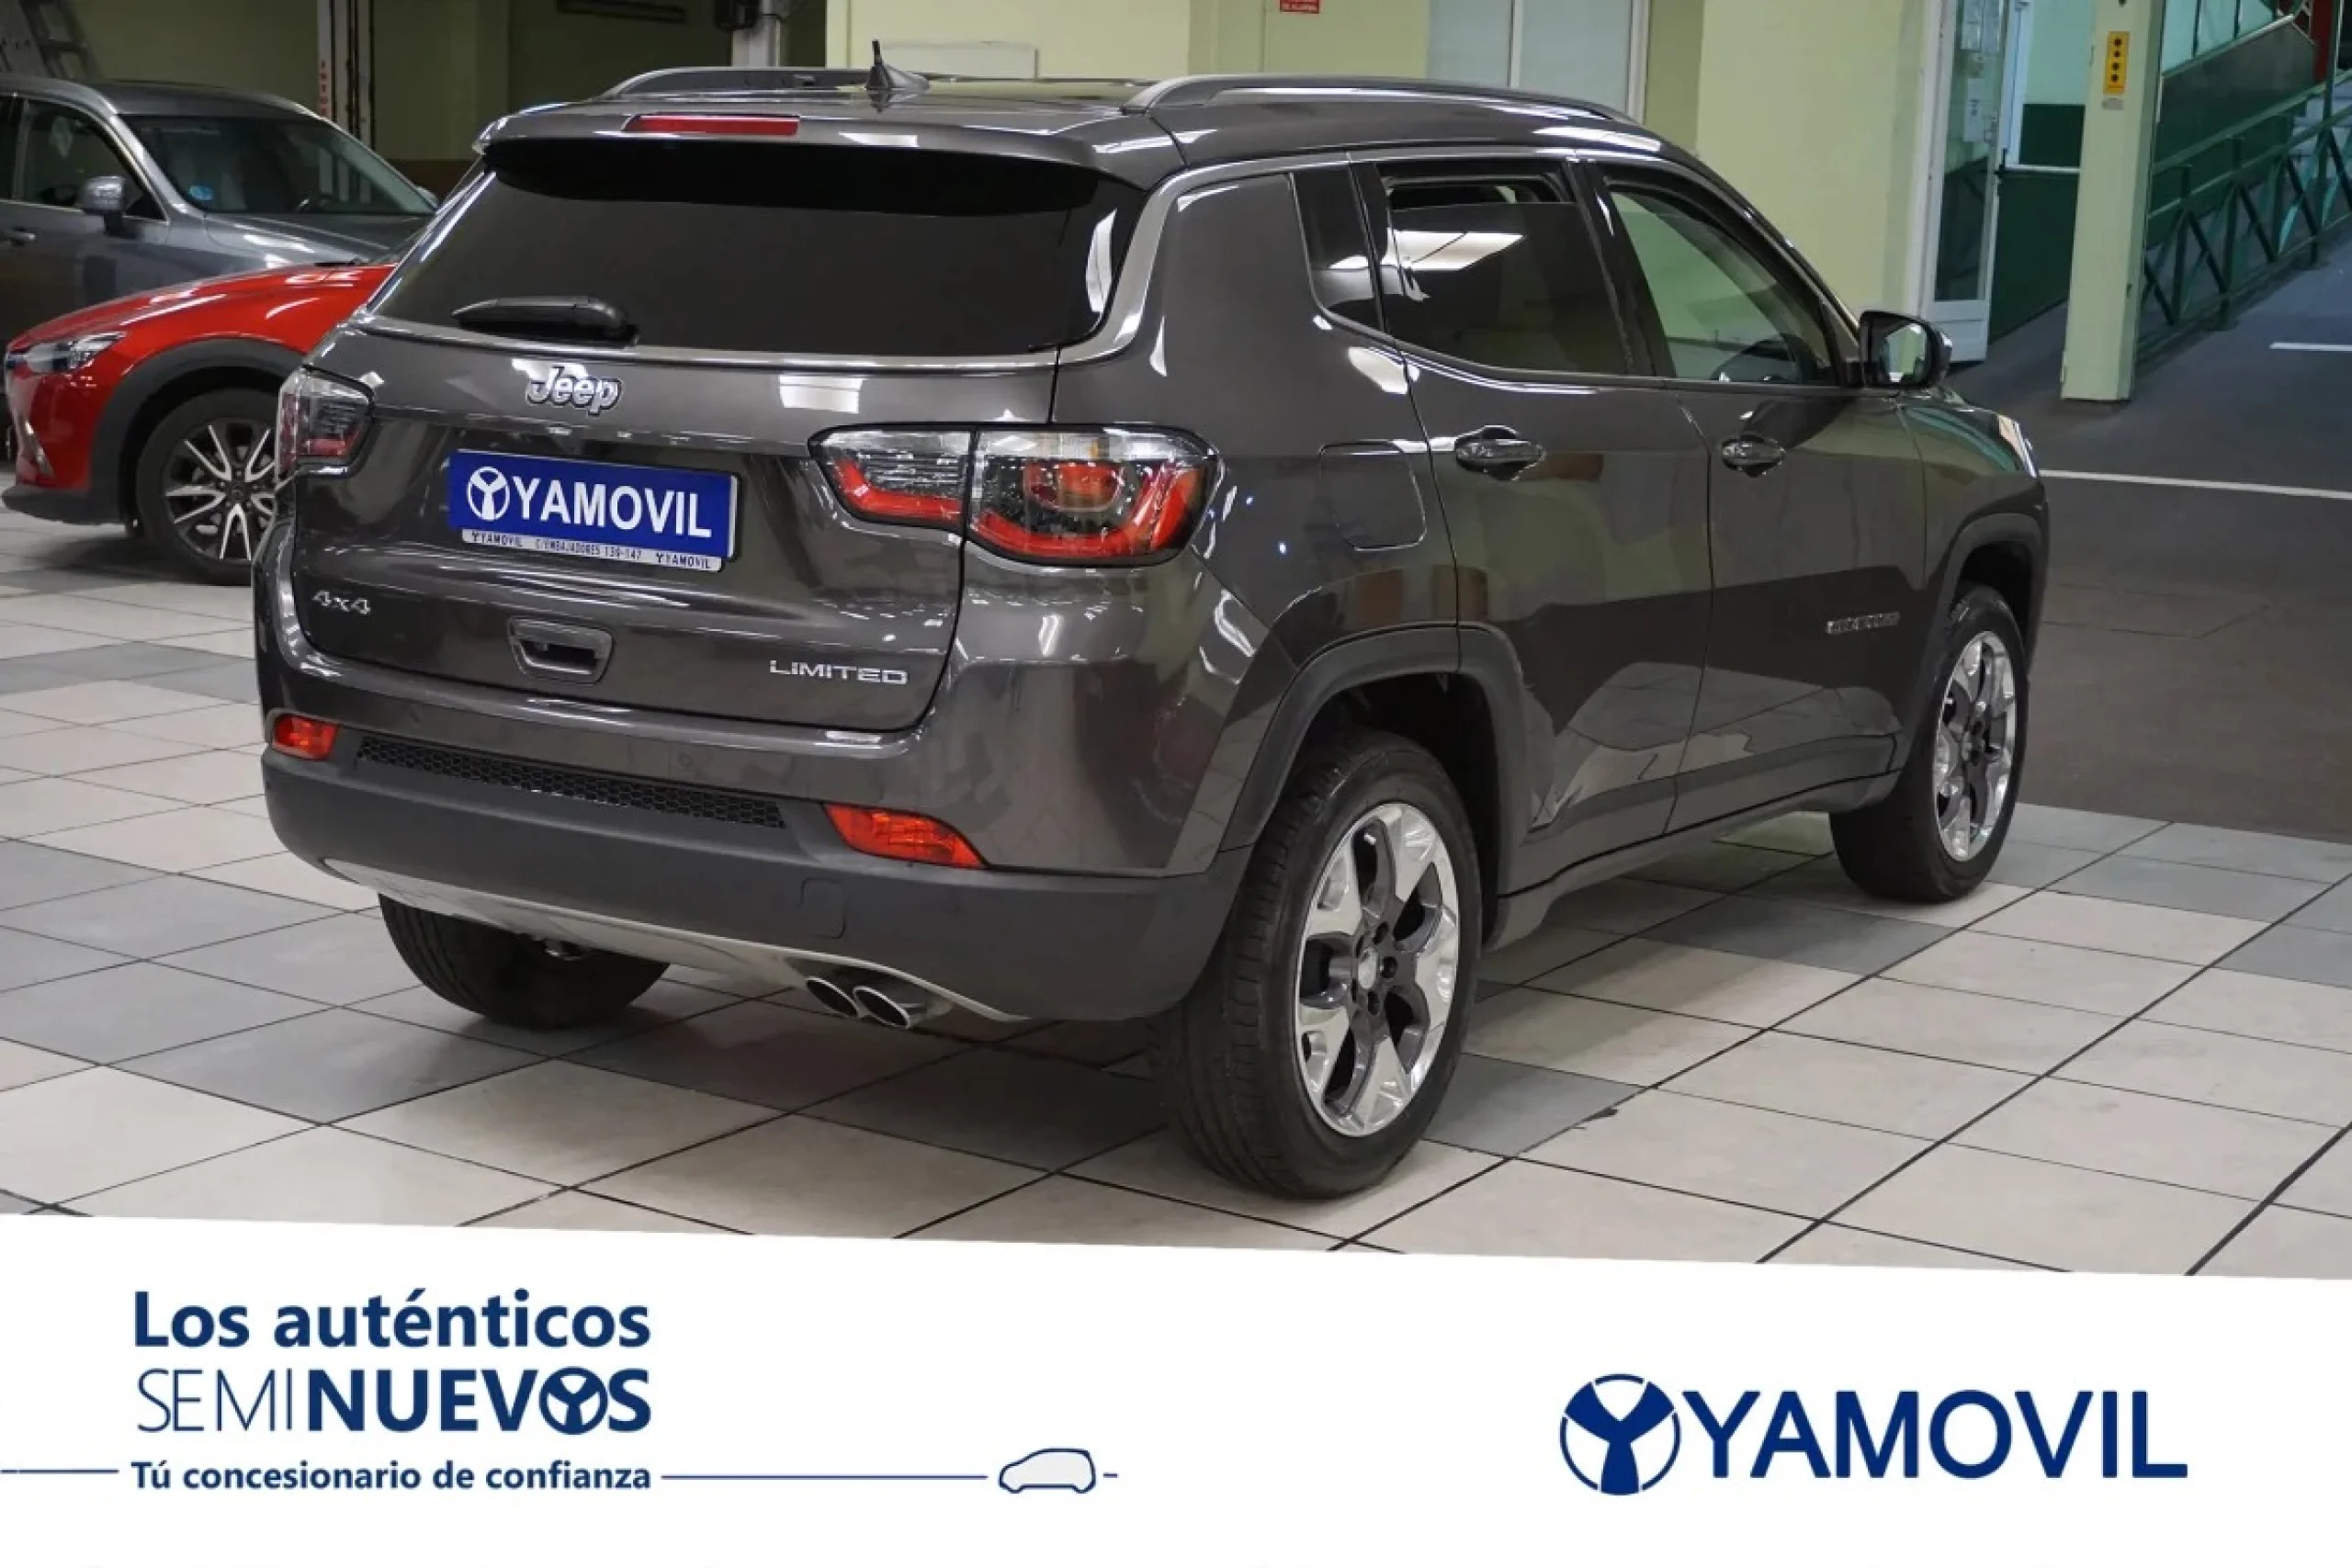 Jeep Compass 1.4 Multiair Limited 4x4 AD Auto 125 kW (170 CV) - Foto 4